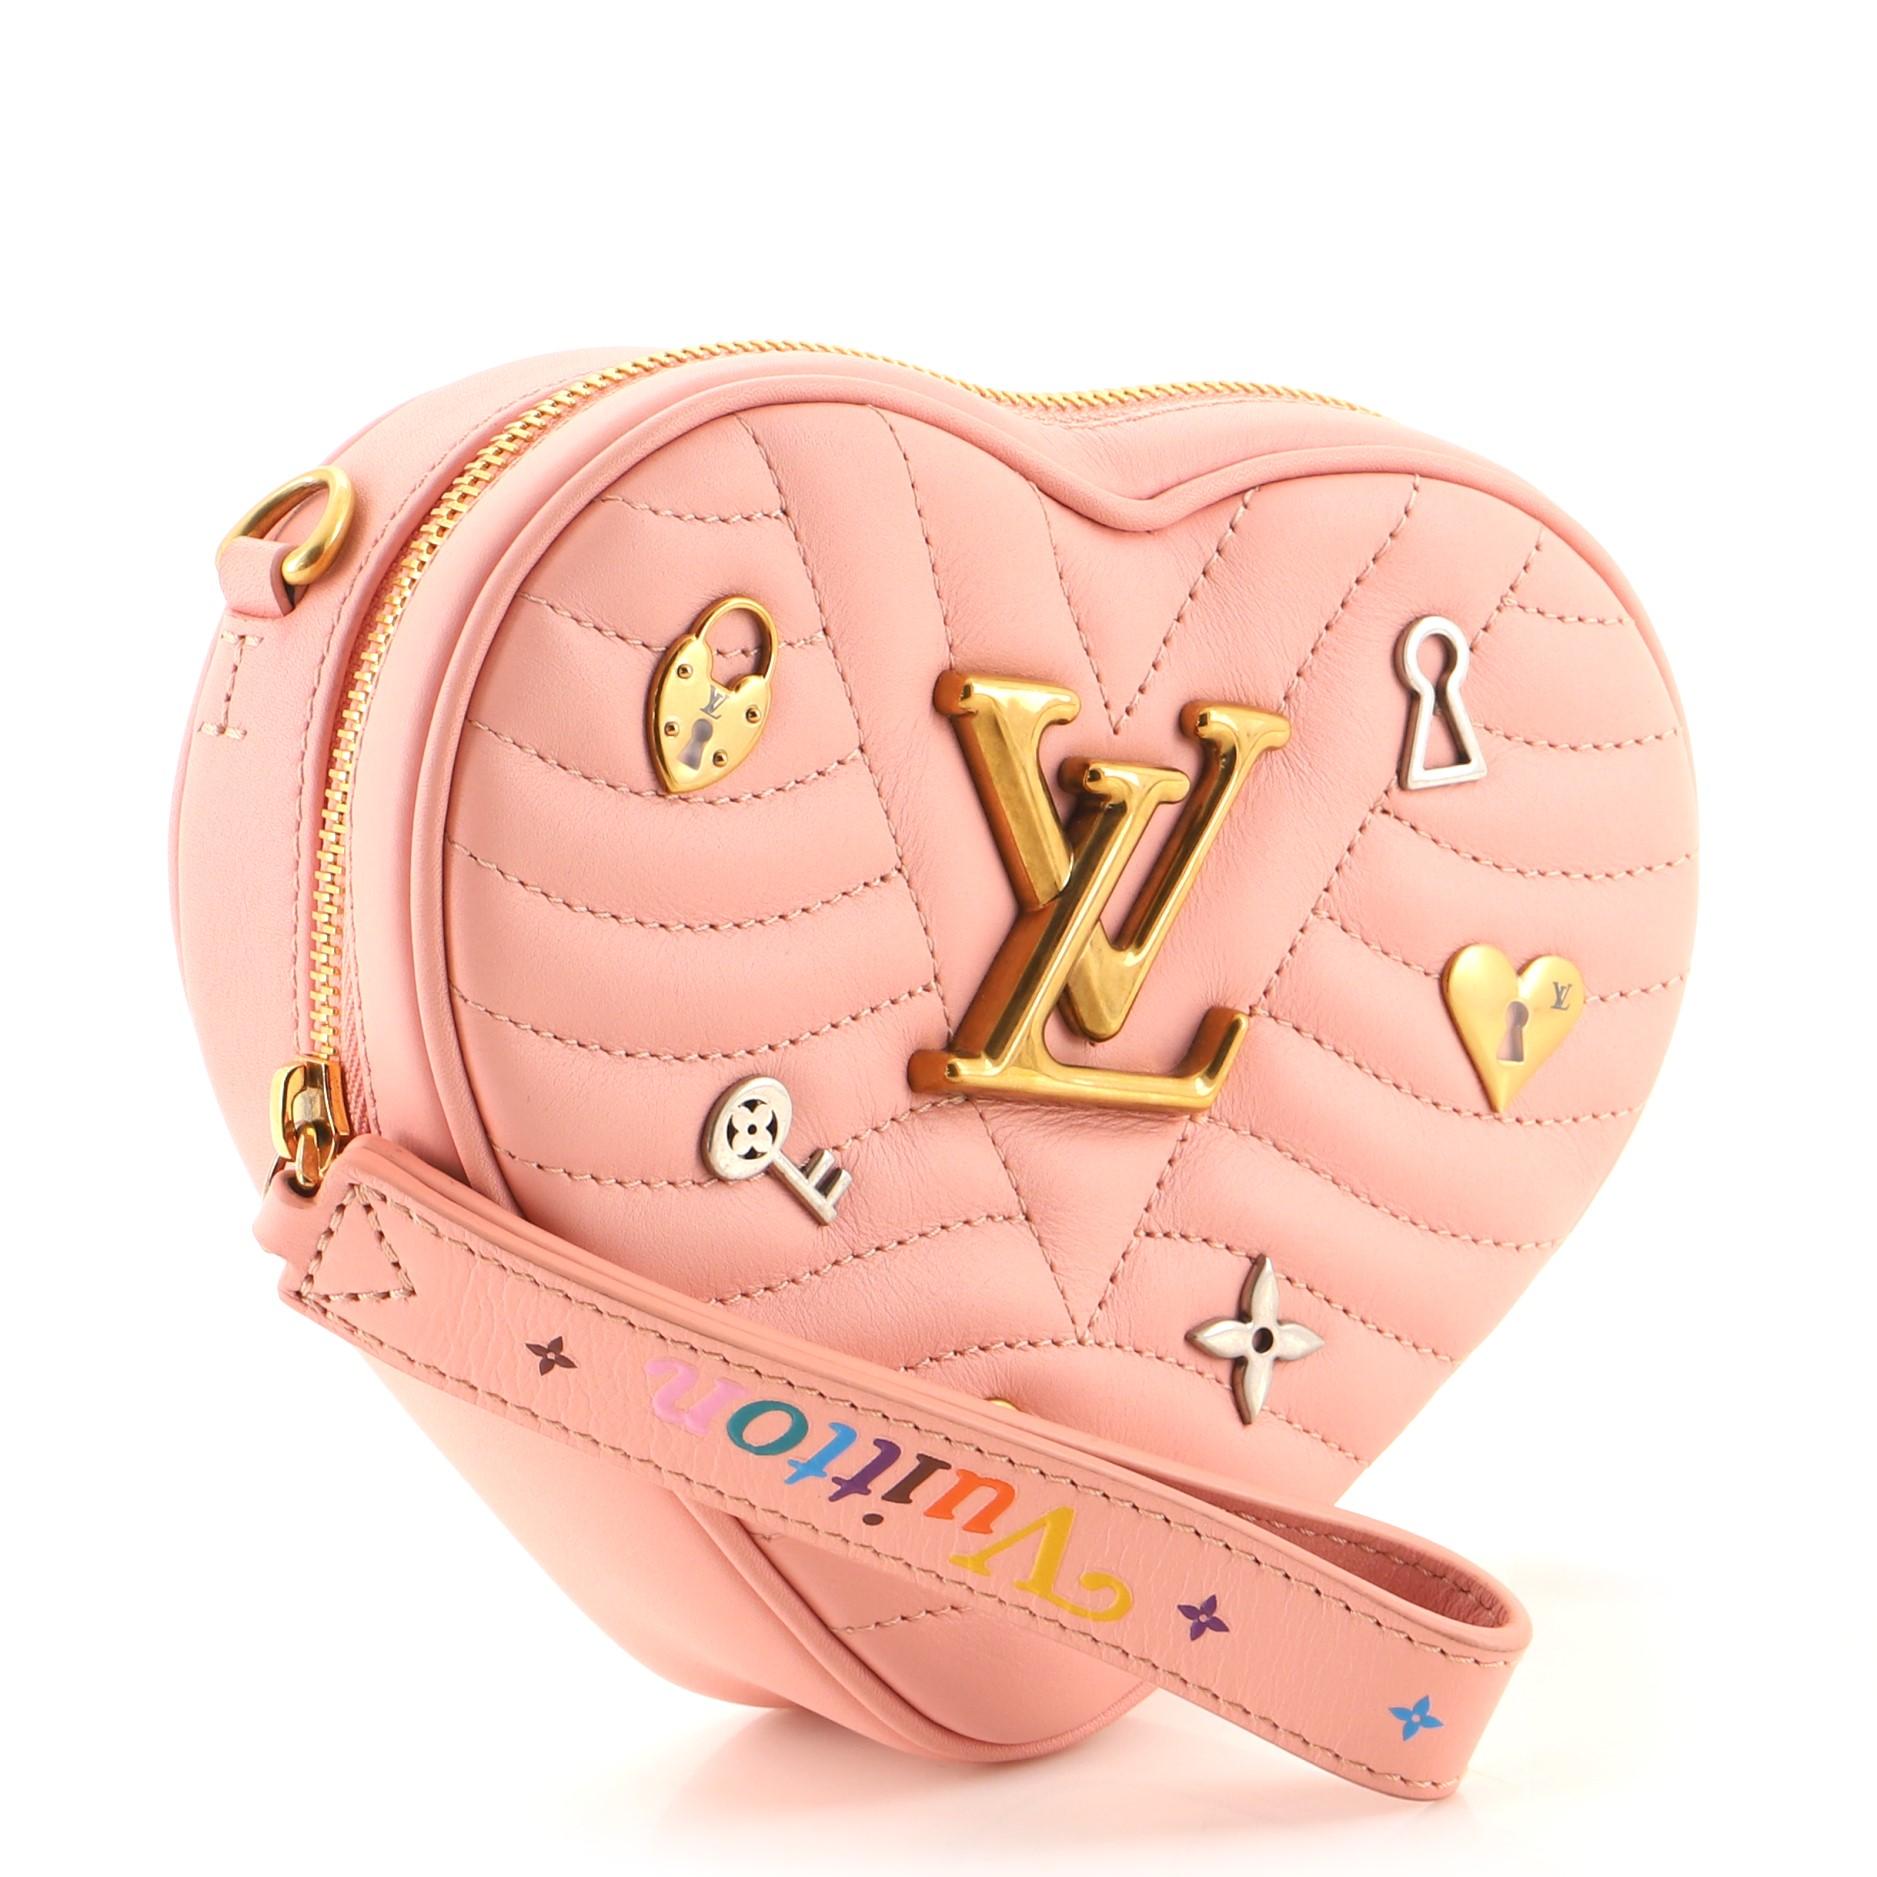 Louis Vuitton New Wave Heart - 2 For Sale on 1stDibs  louis vuitton new  wave heart bag, louis vuitton heart bag new wave, lv heart shaped bag